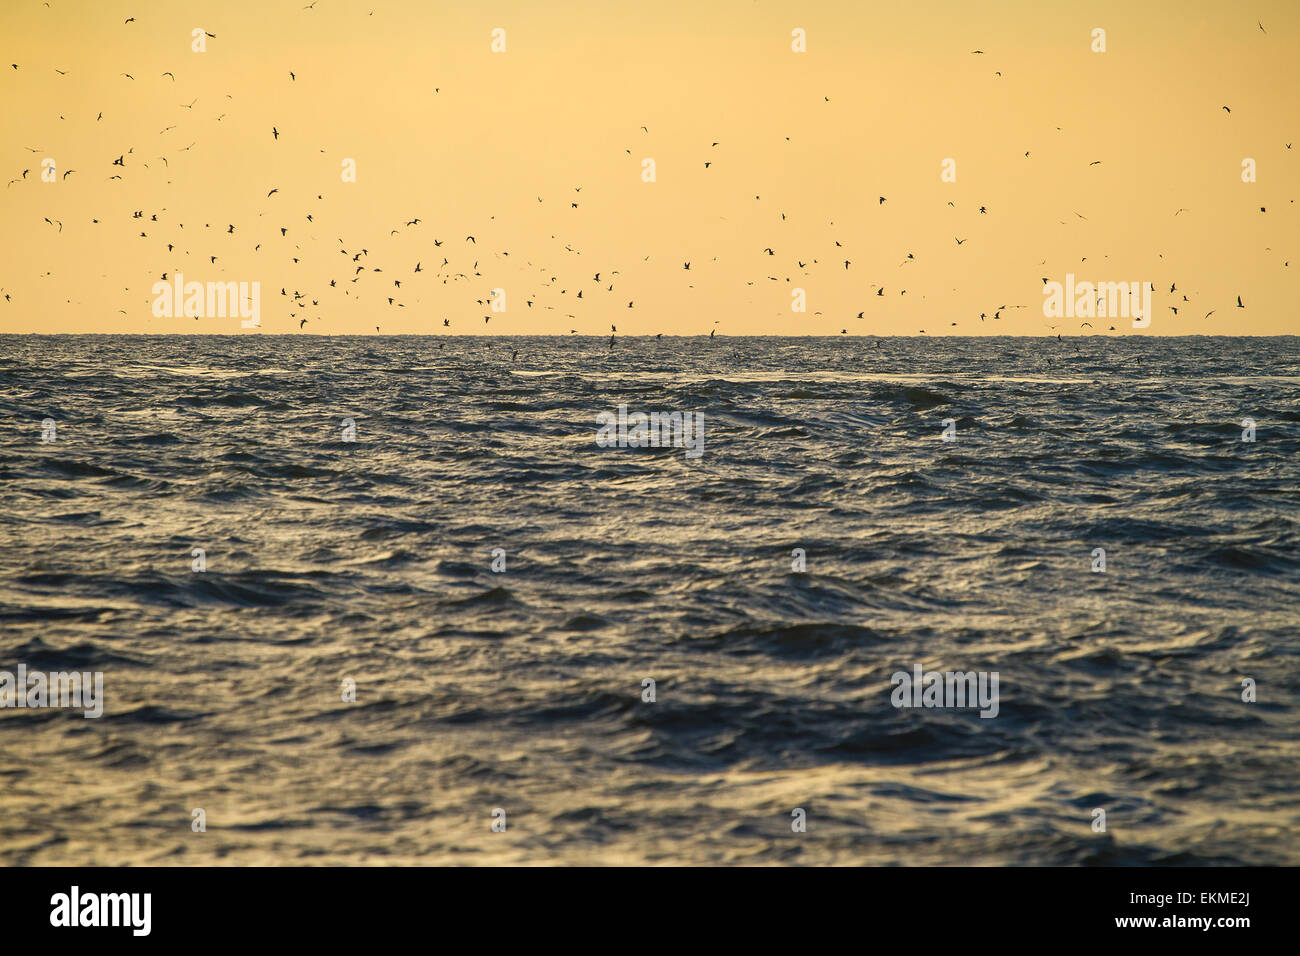 Flock of birds over sea waves at sunset Stock Photo